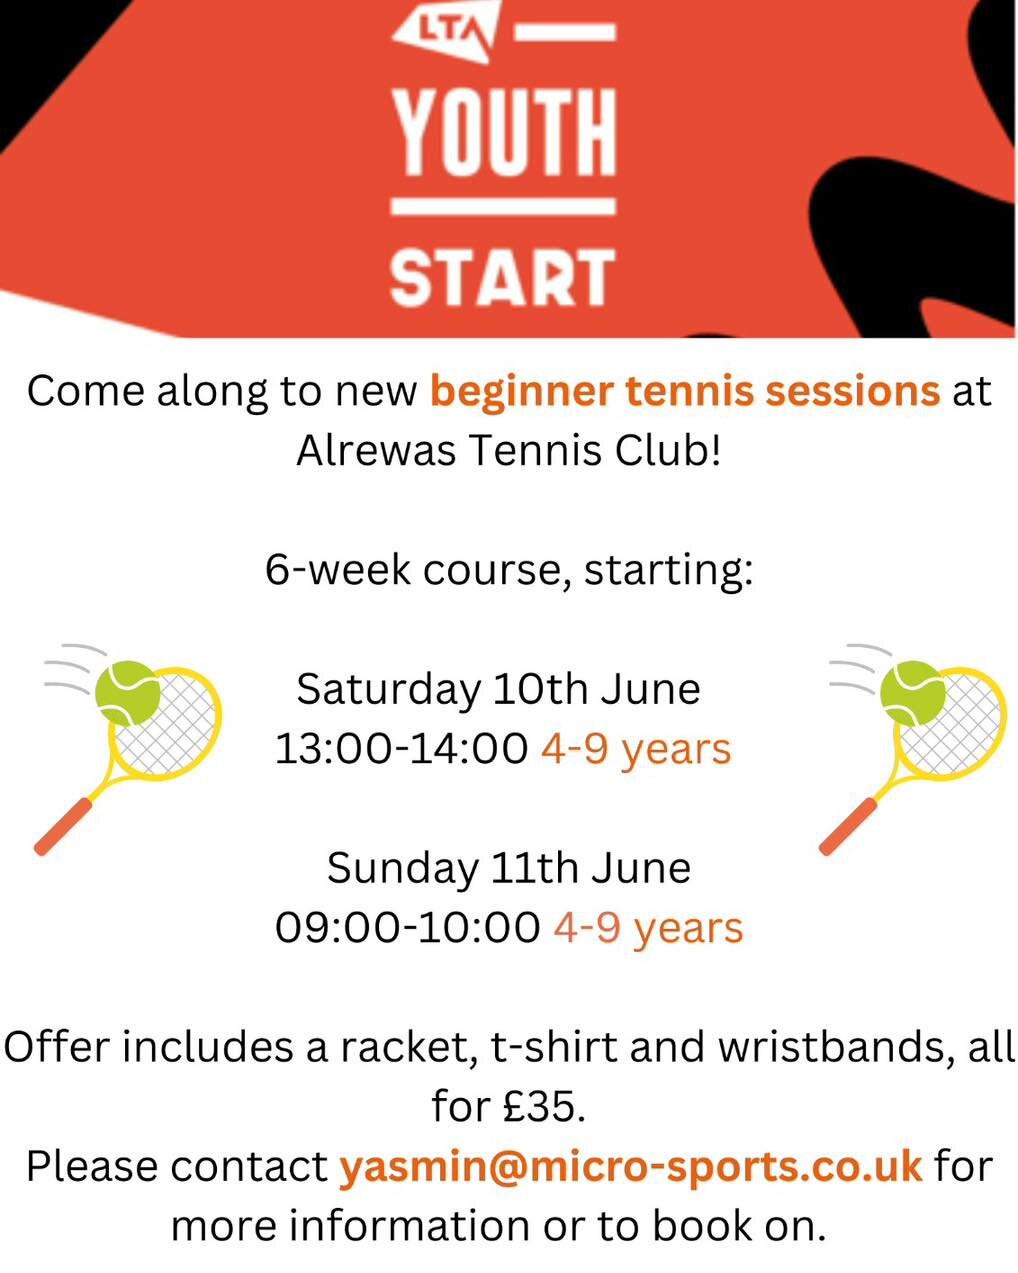 Hi Everyone!

Alrewas Tennis Club have an exciting new programme starting after half term for children aged 4-10 years old. 

Children will get 6 lessons, plus a racket, tshirt, wristbands and balls, all for &pound;35! 

This is run by an experienced